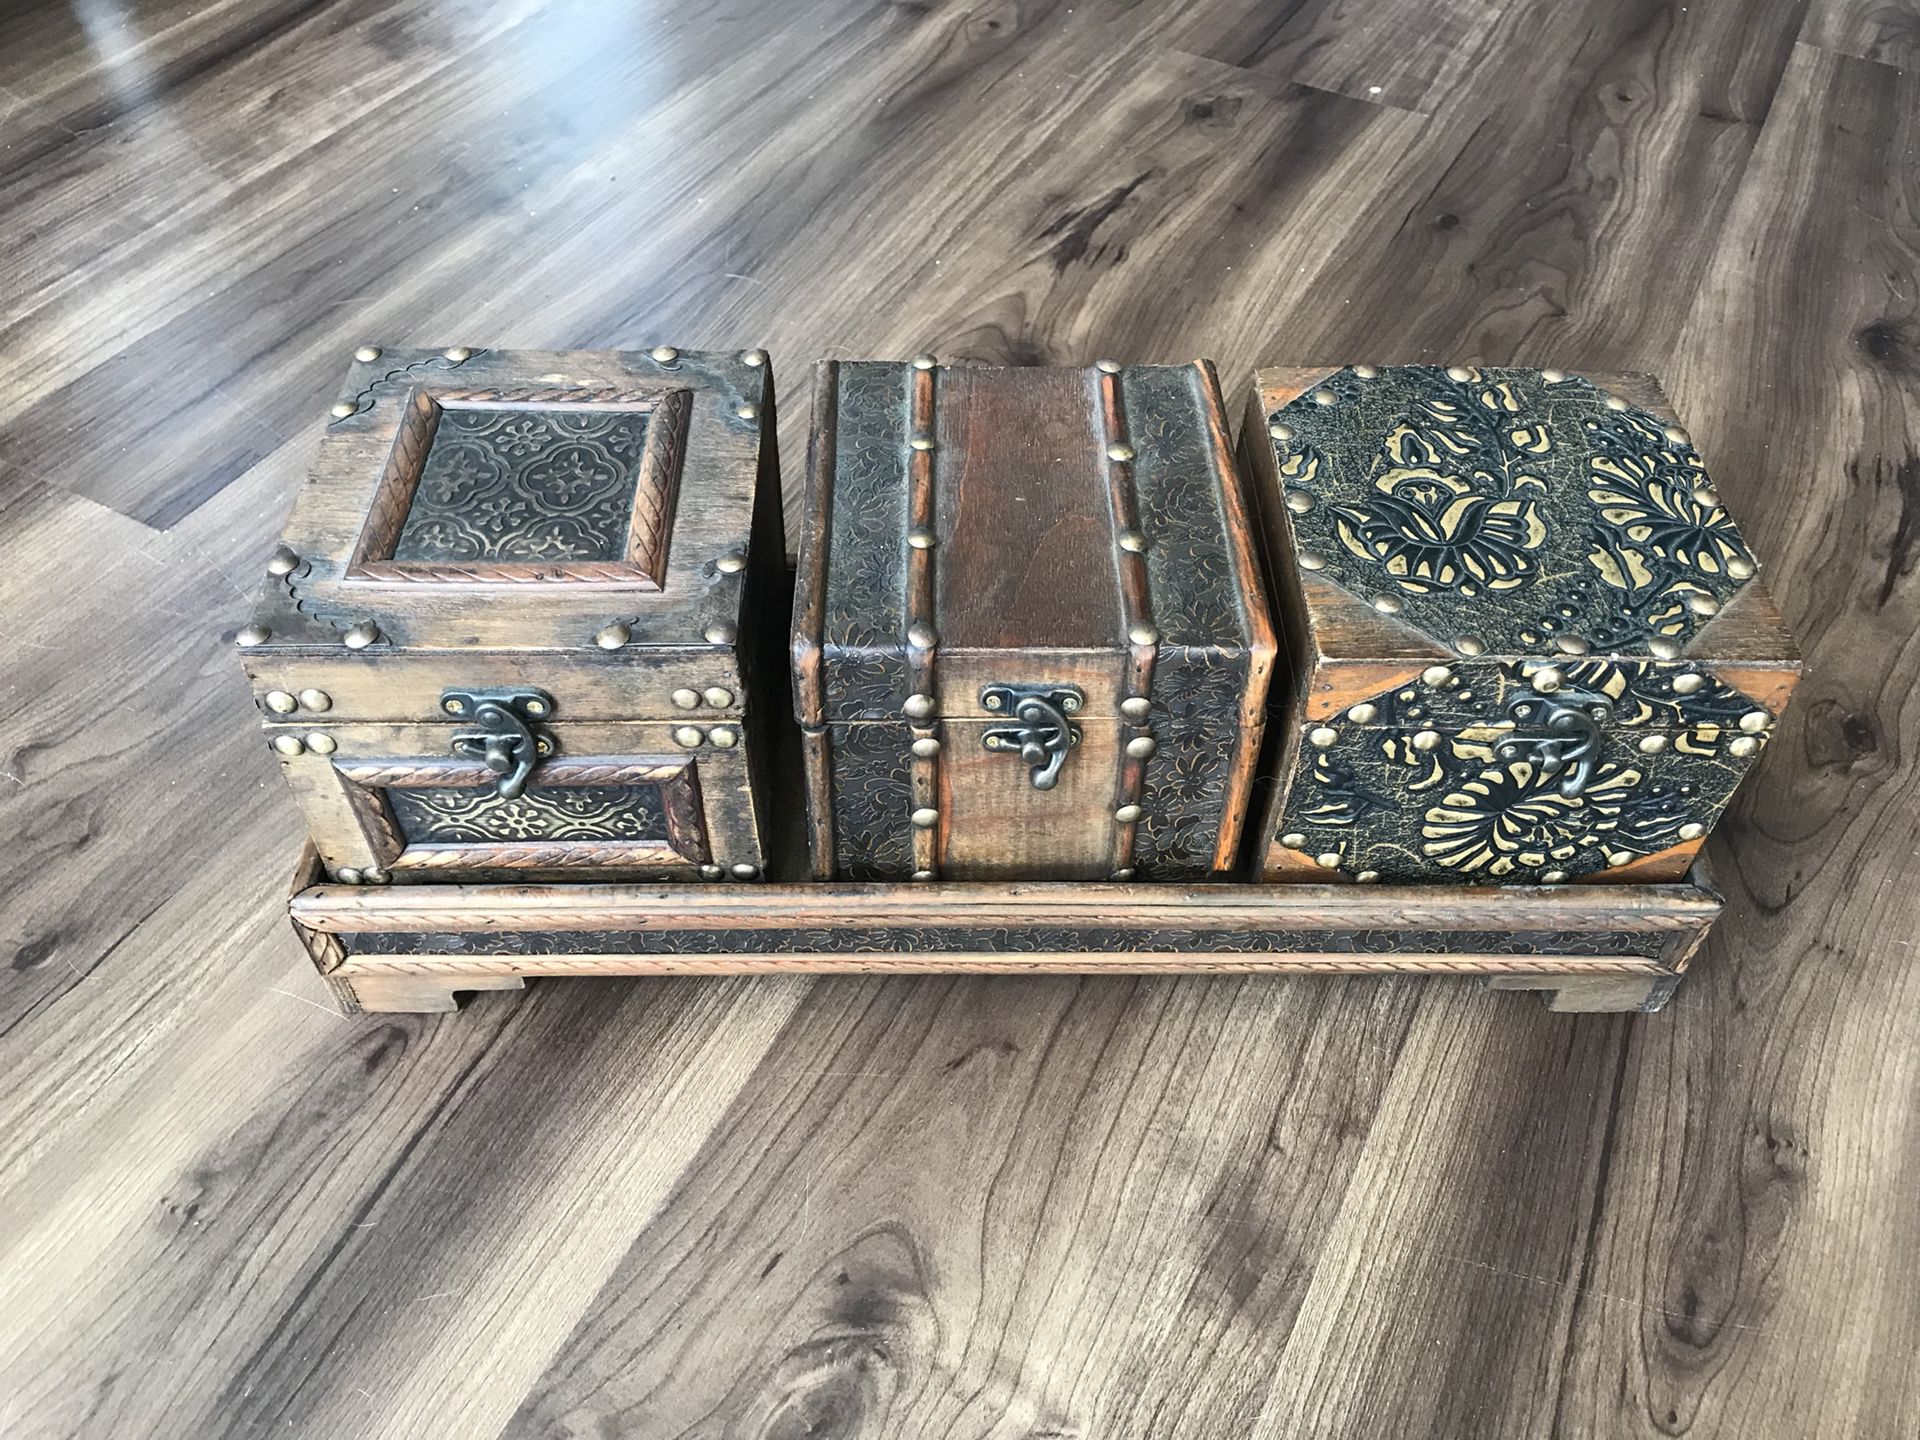 Decorative Wooden Storage Containers with intricate detail and latches